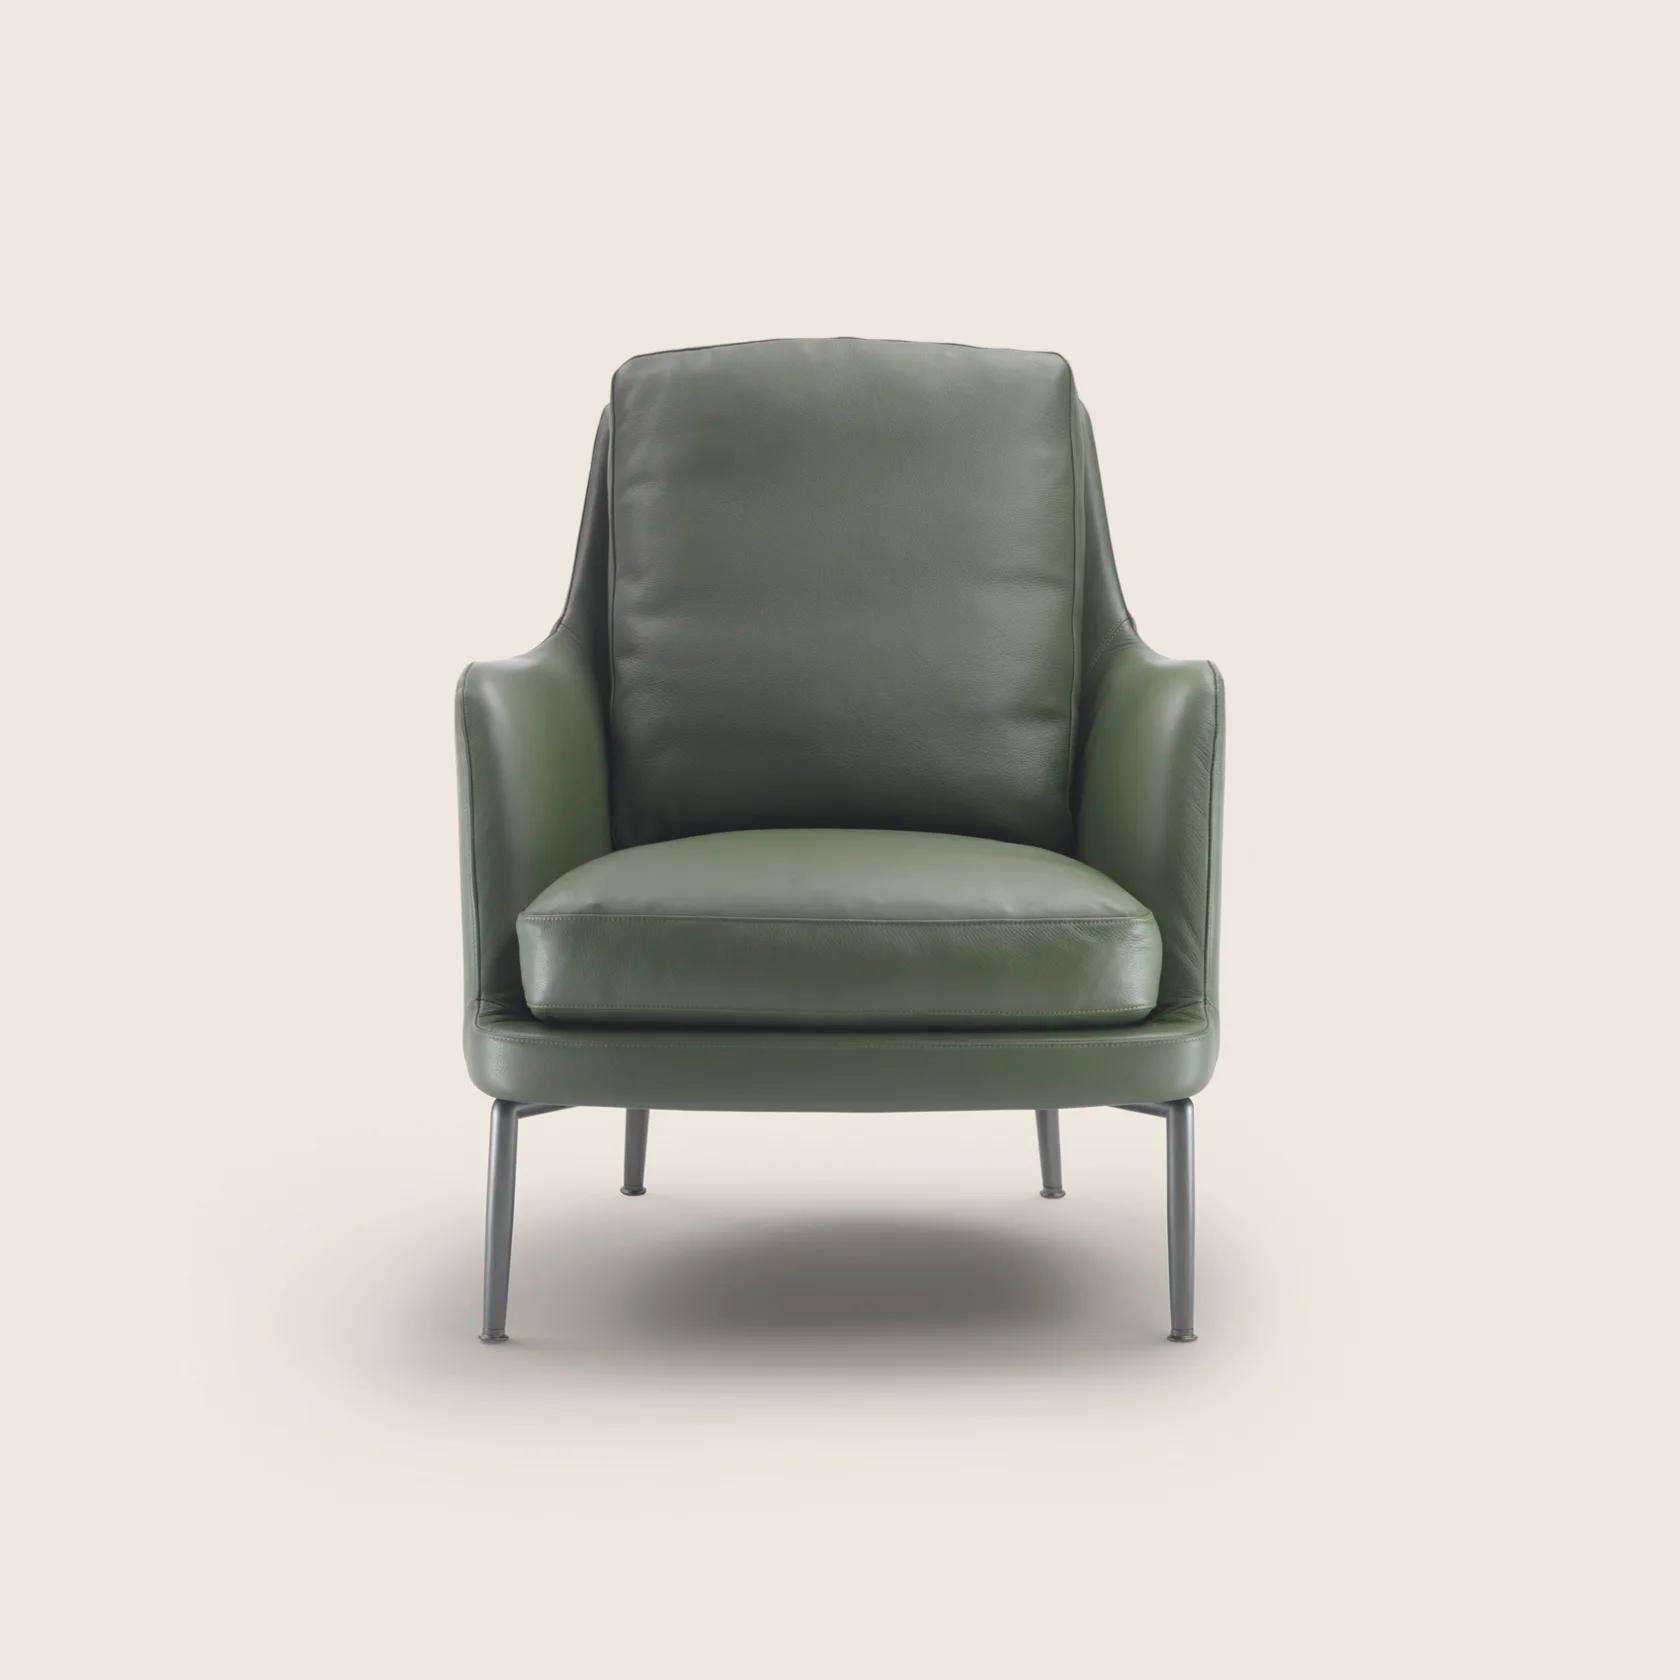 028623_MARLEY_ARMCHAIR_06.png